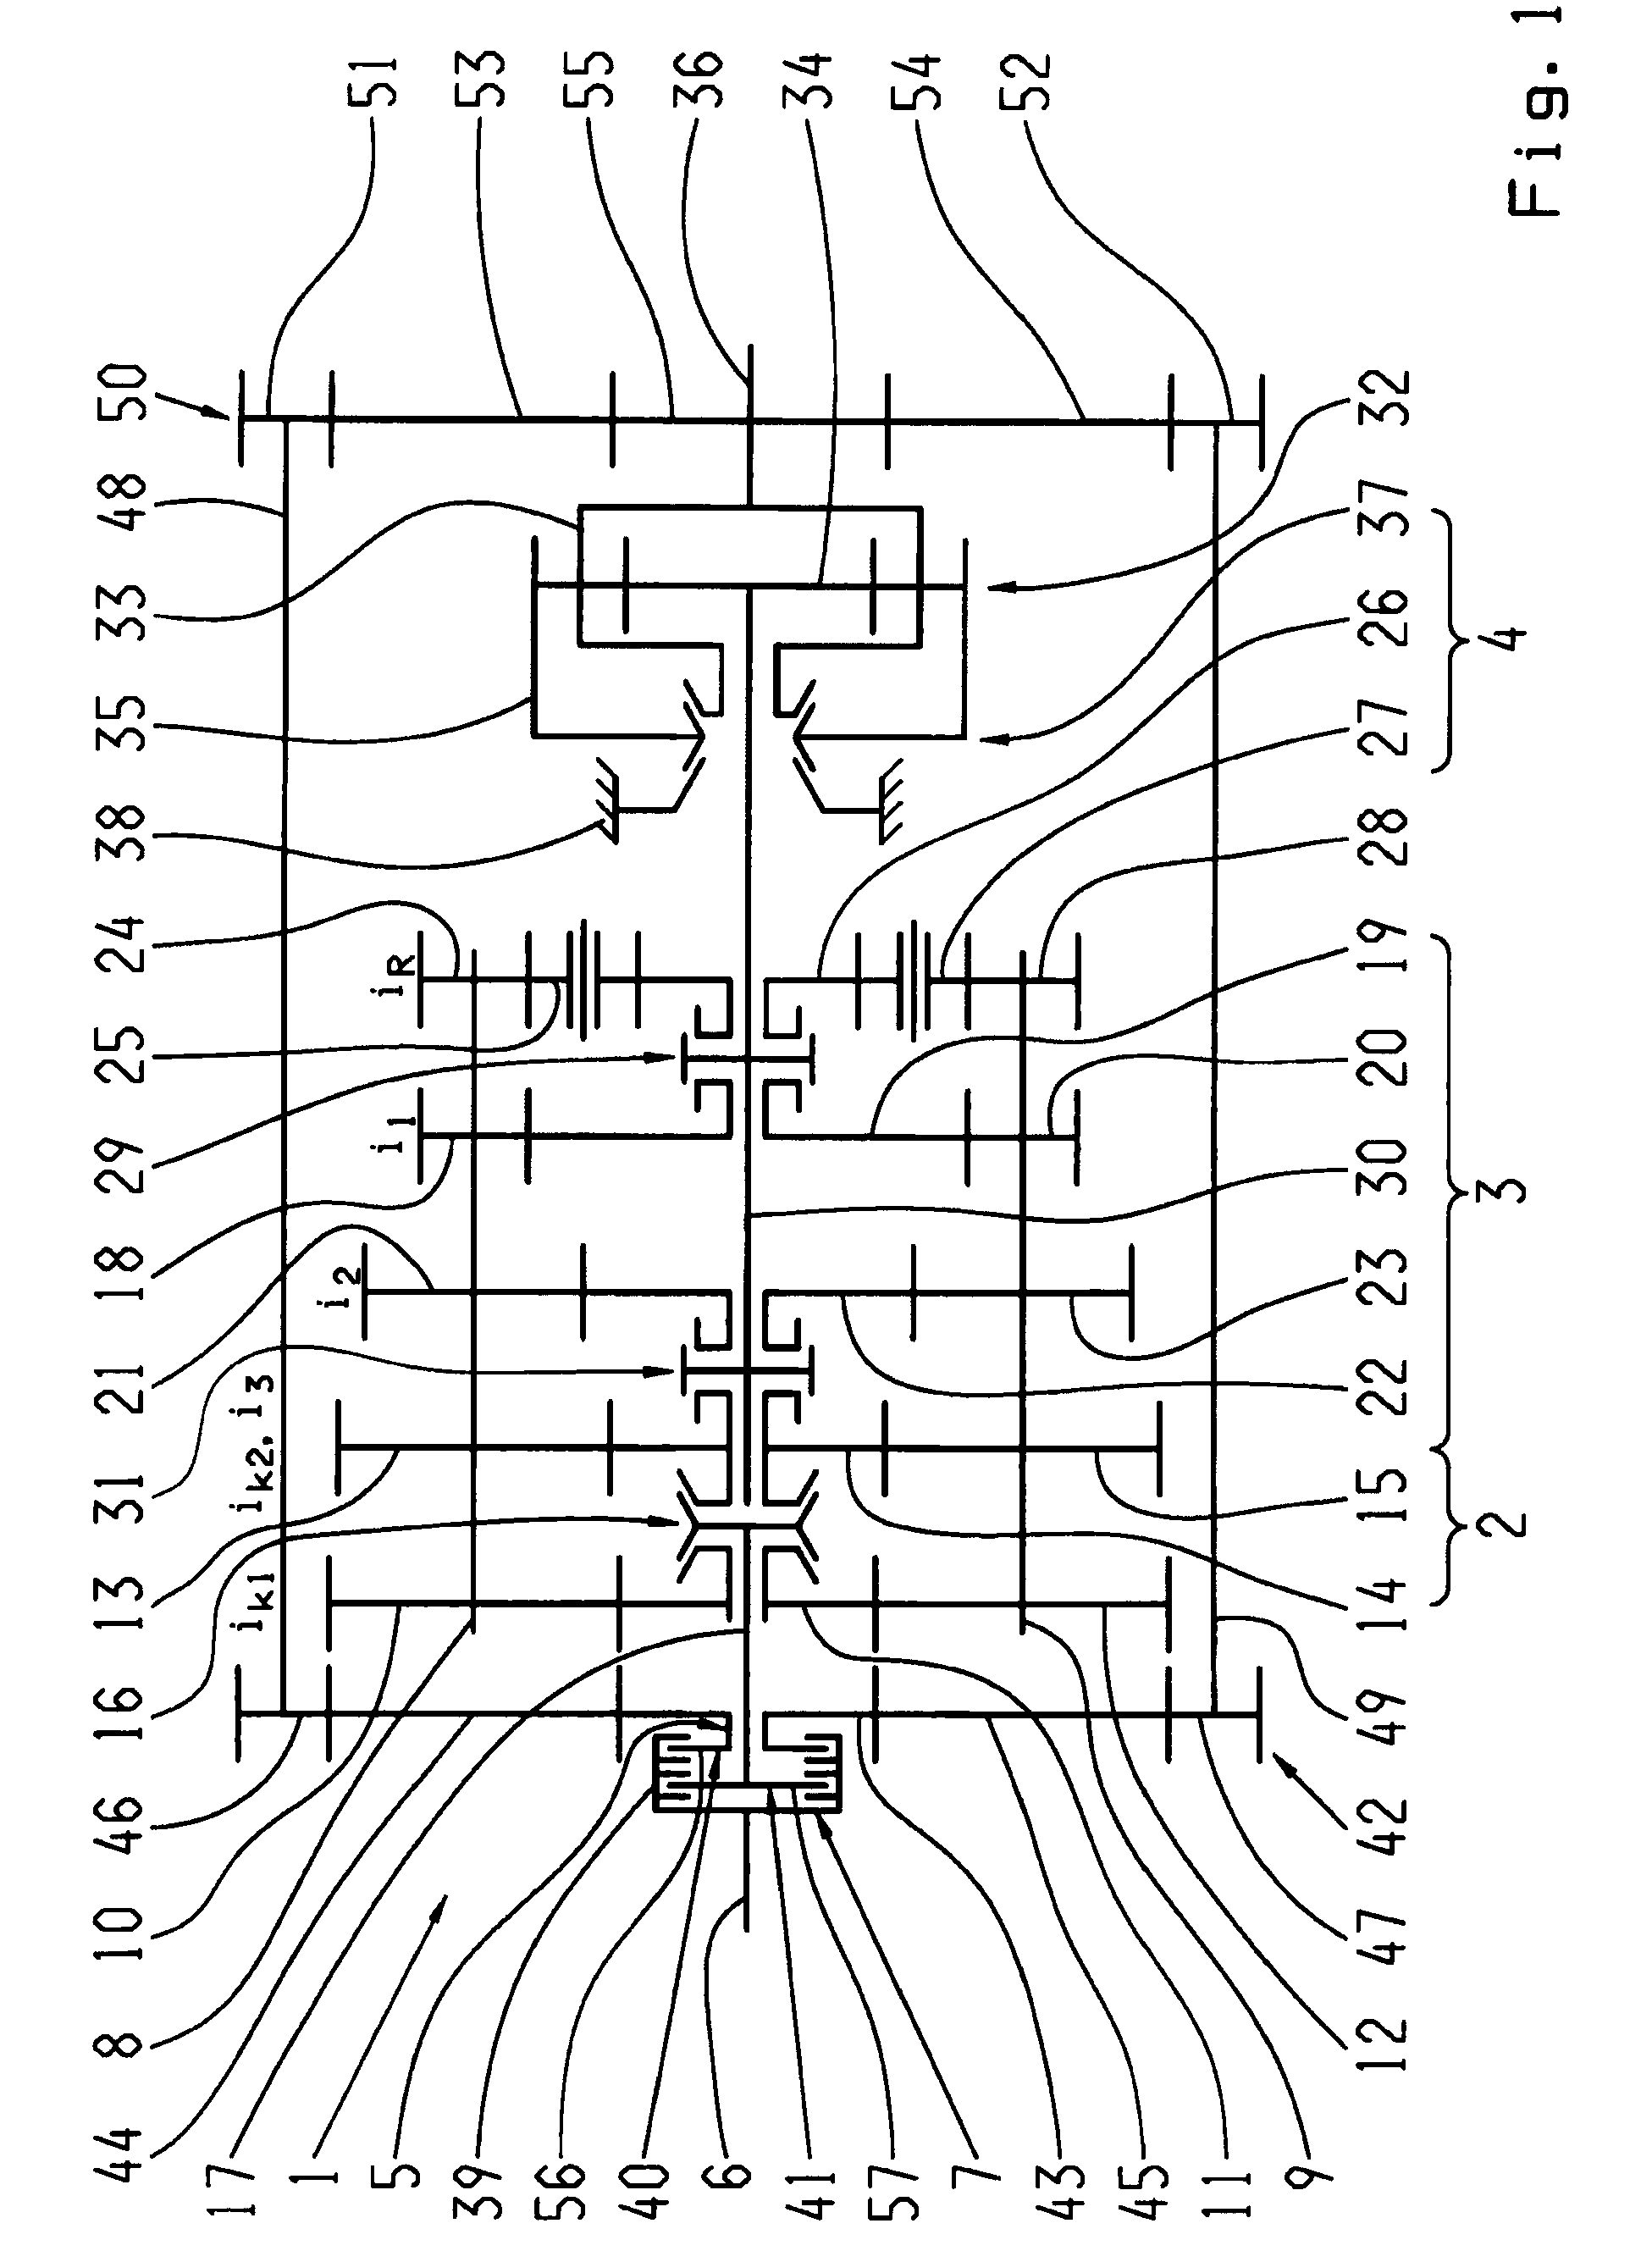 Multi-group transmission of a motor vehicle